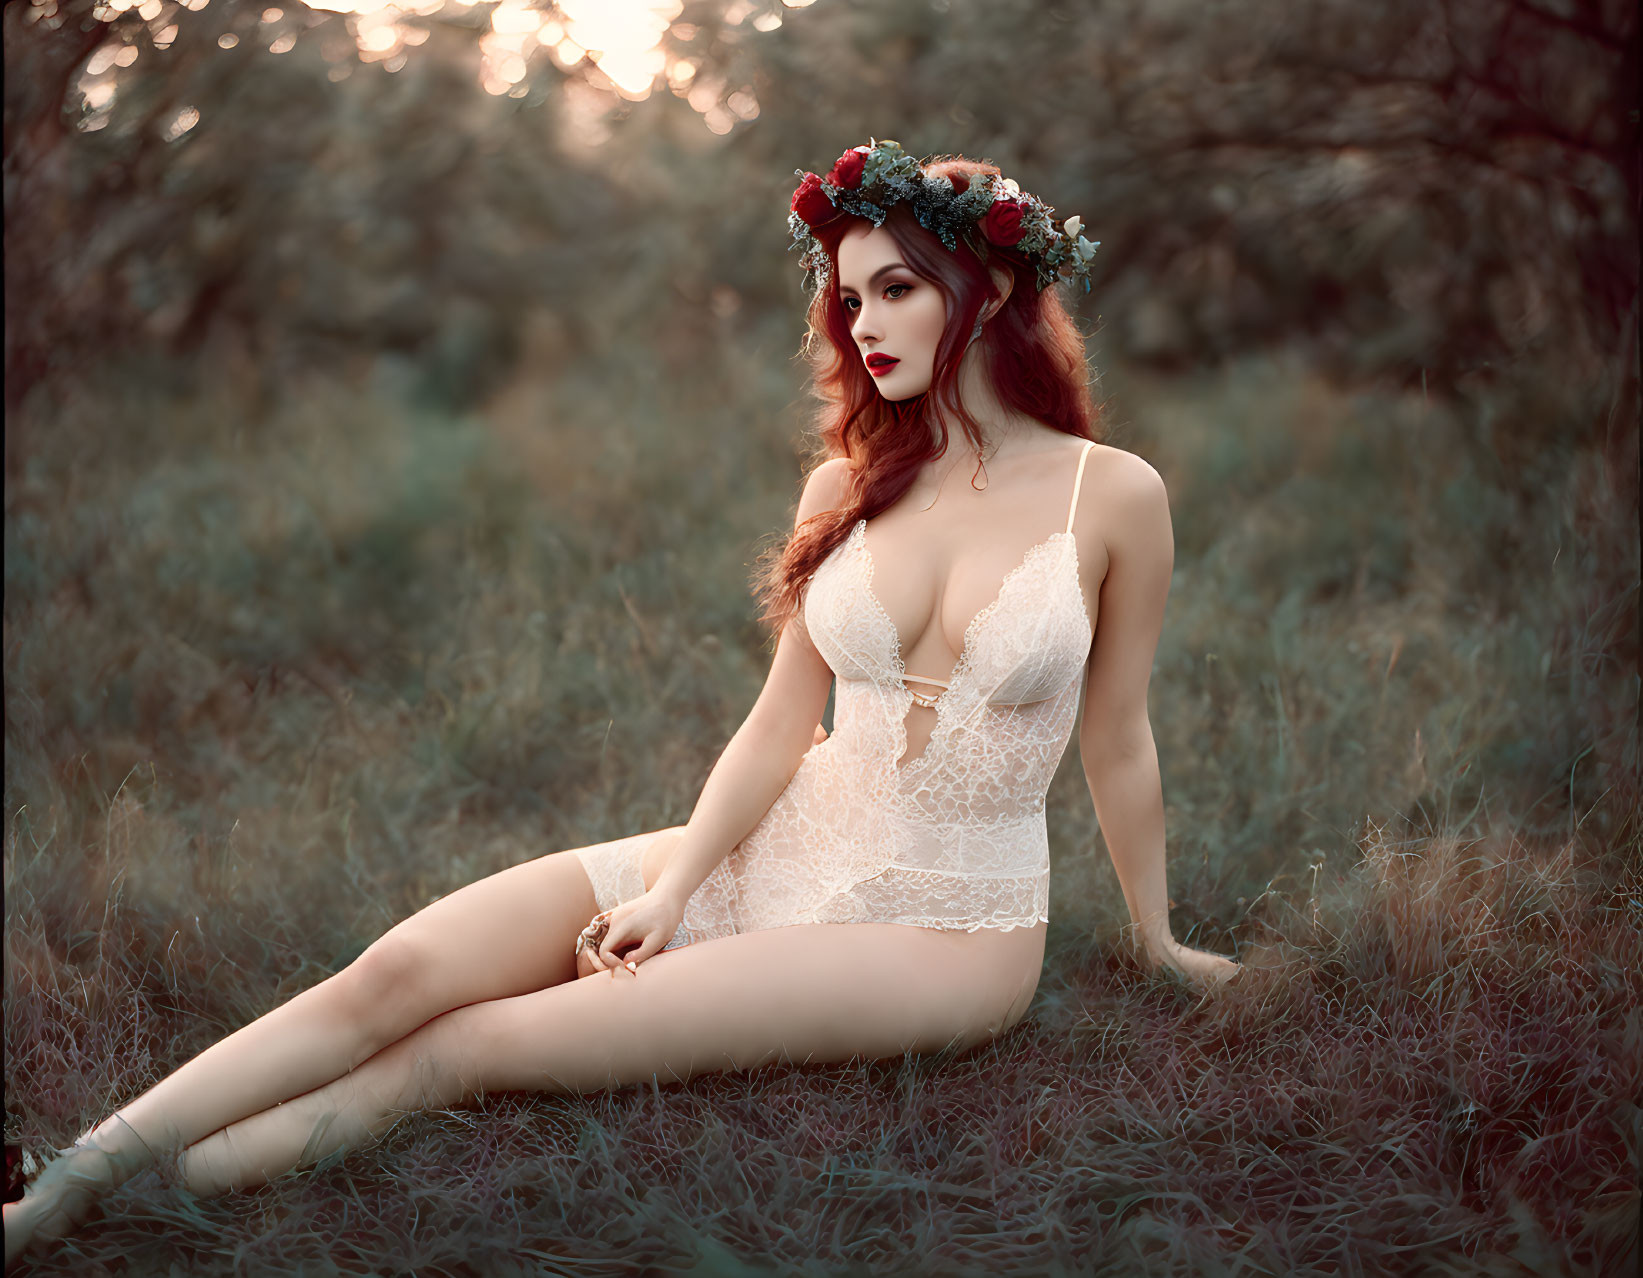 Red-haired woman in white lace and floral wreath sitting in field at dusk